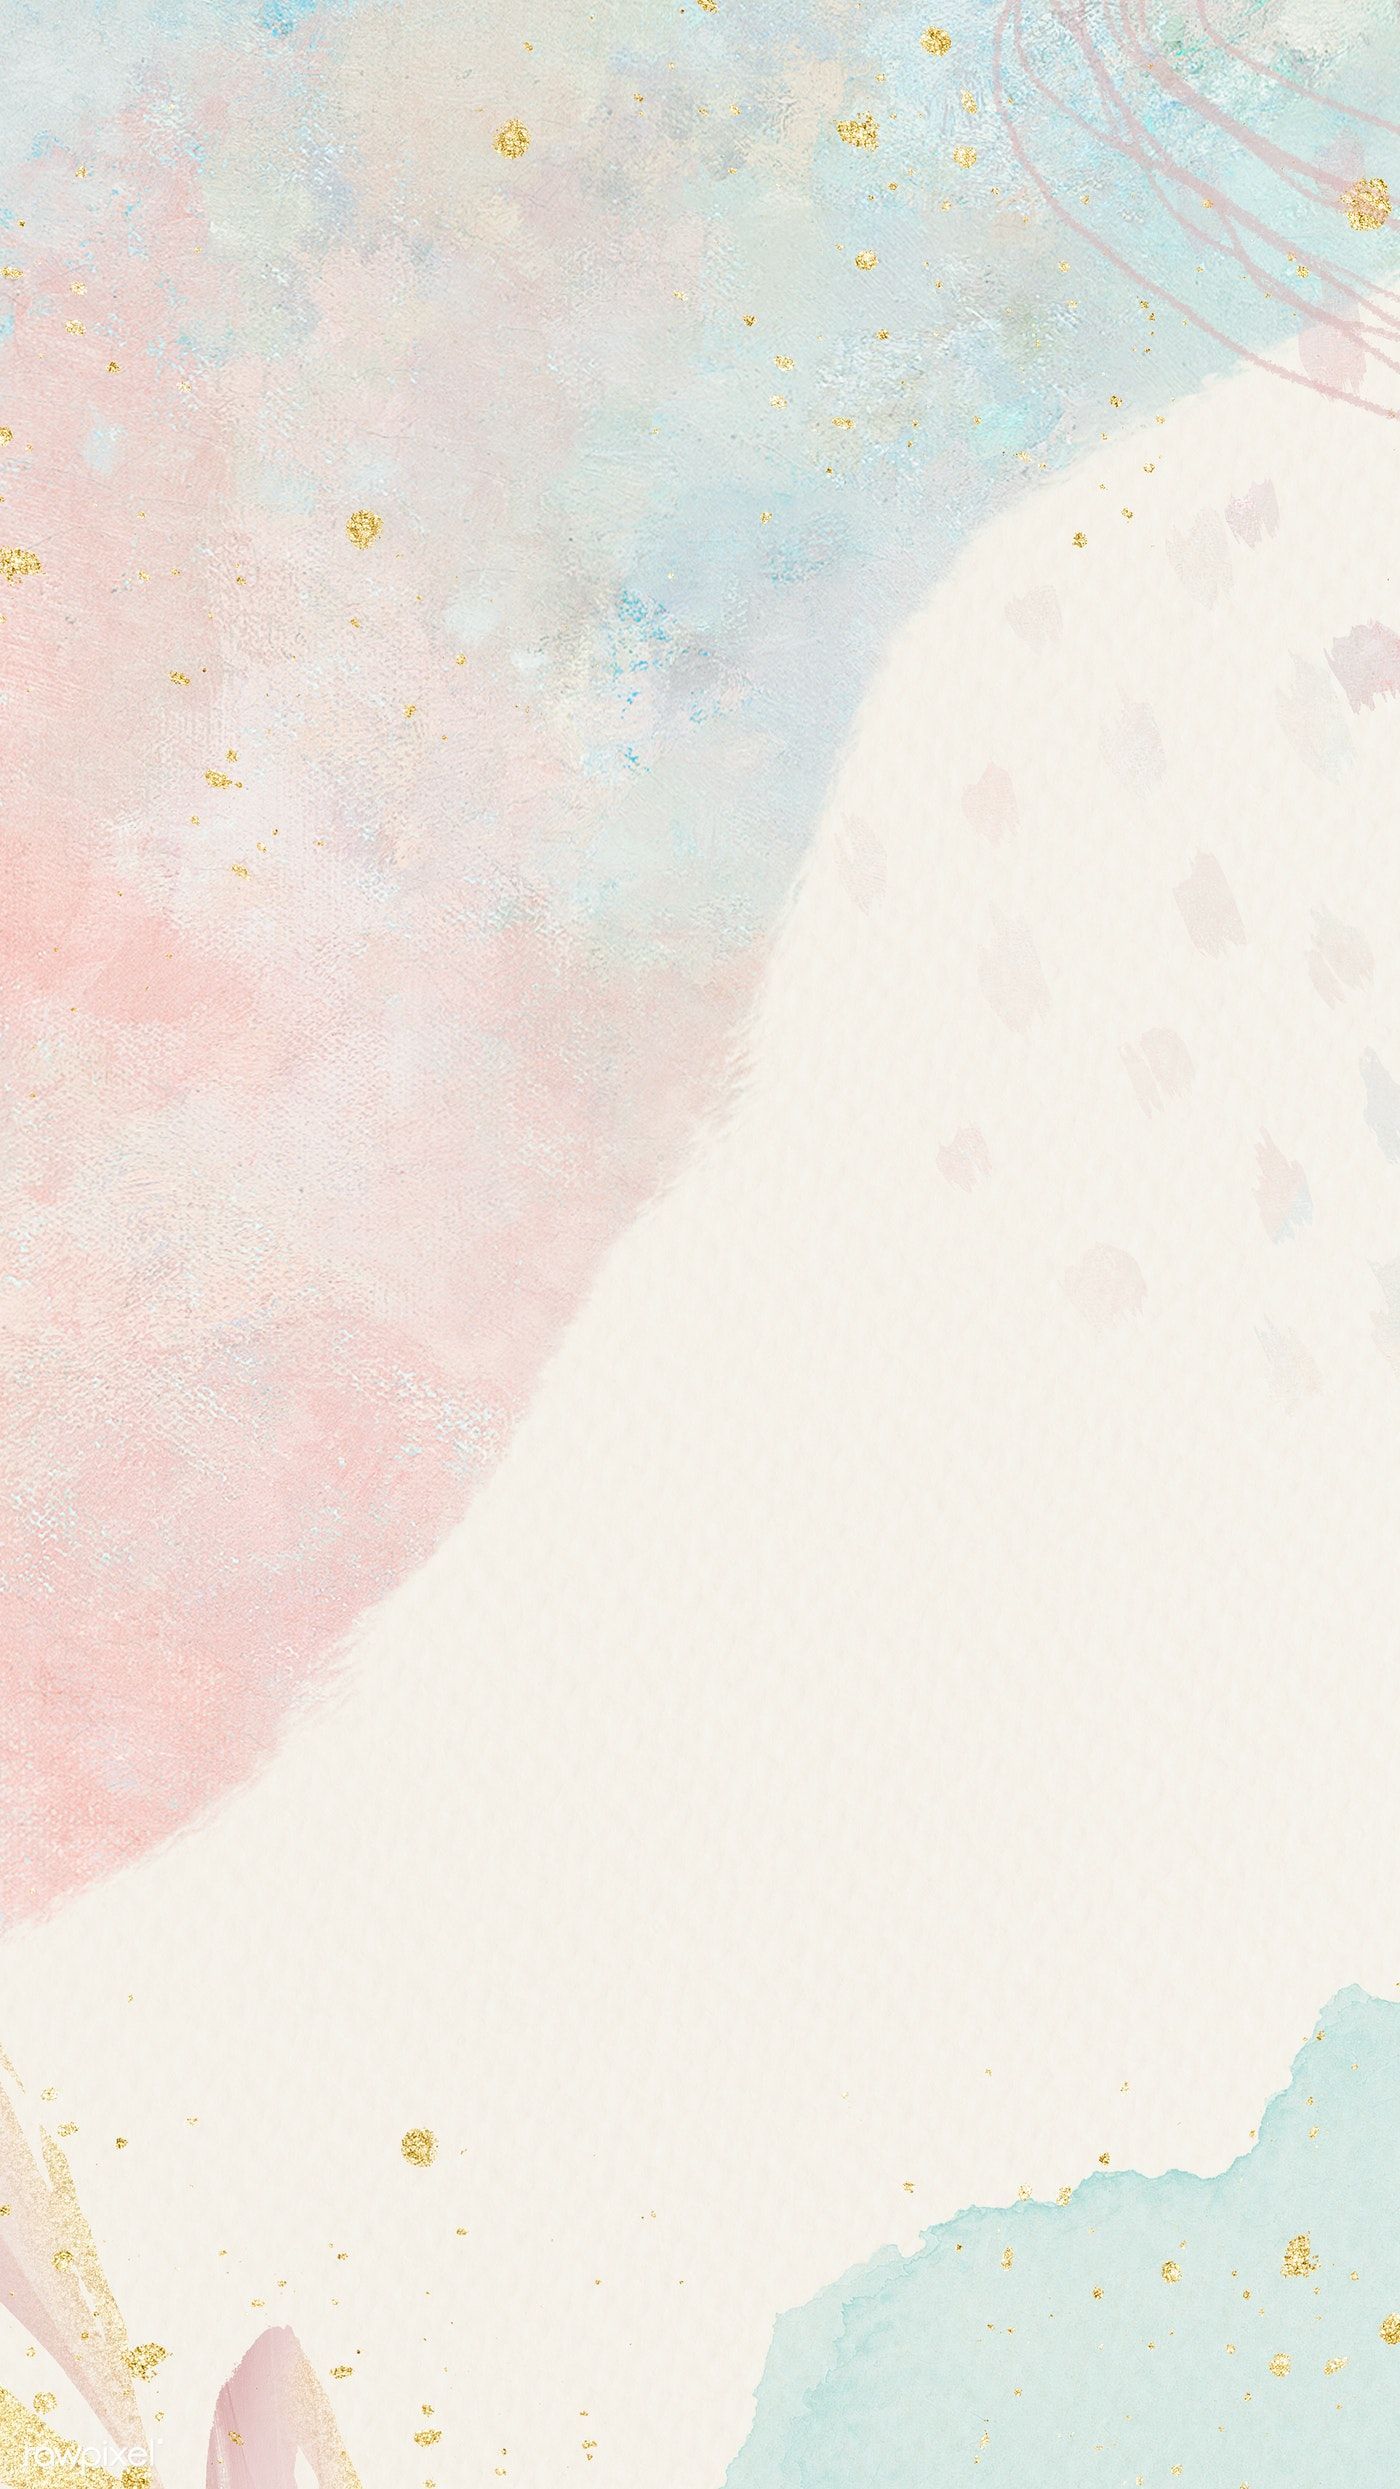 A watercolor background with pastel colors and gold foil. - Watercolor